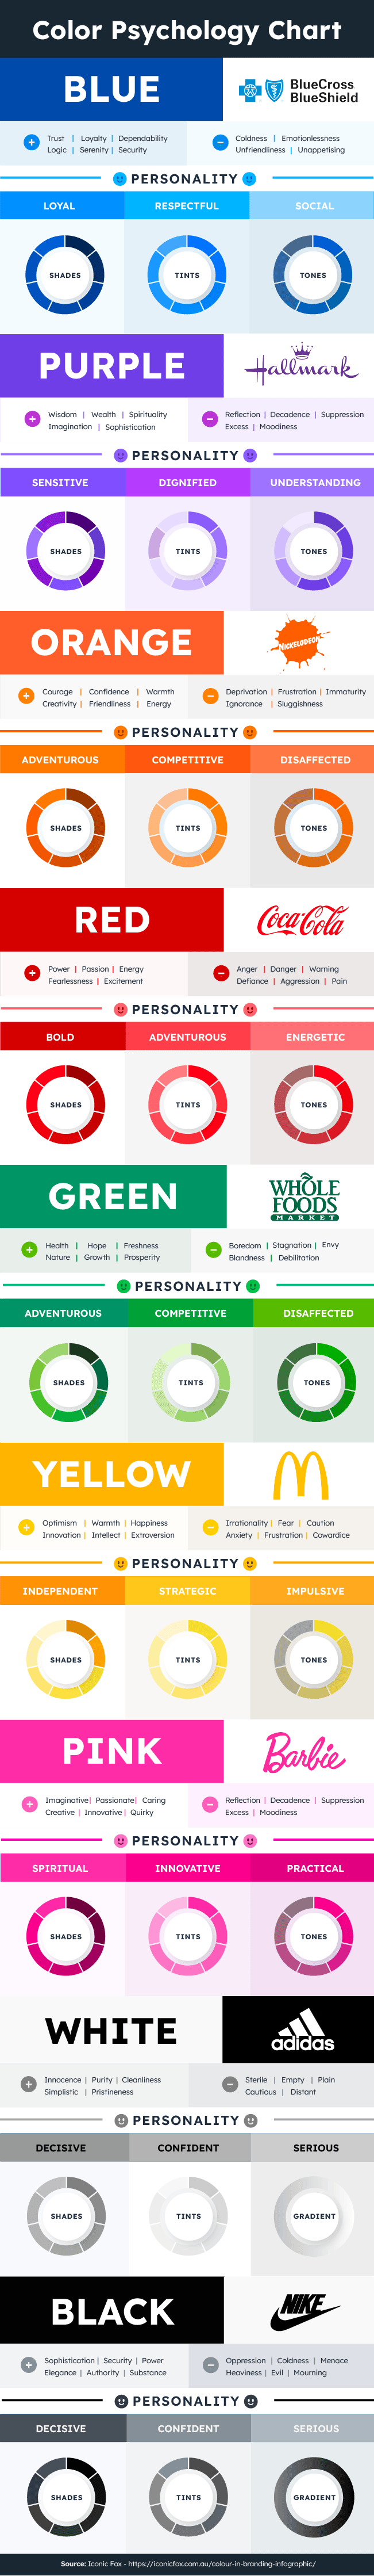 How to use the psychology of color in marketing to increase your